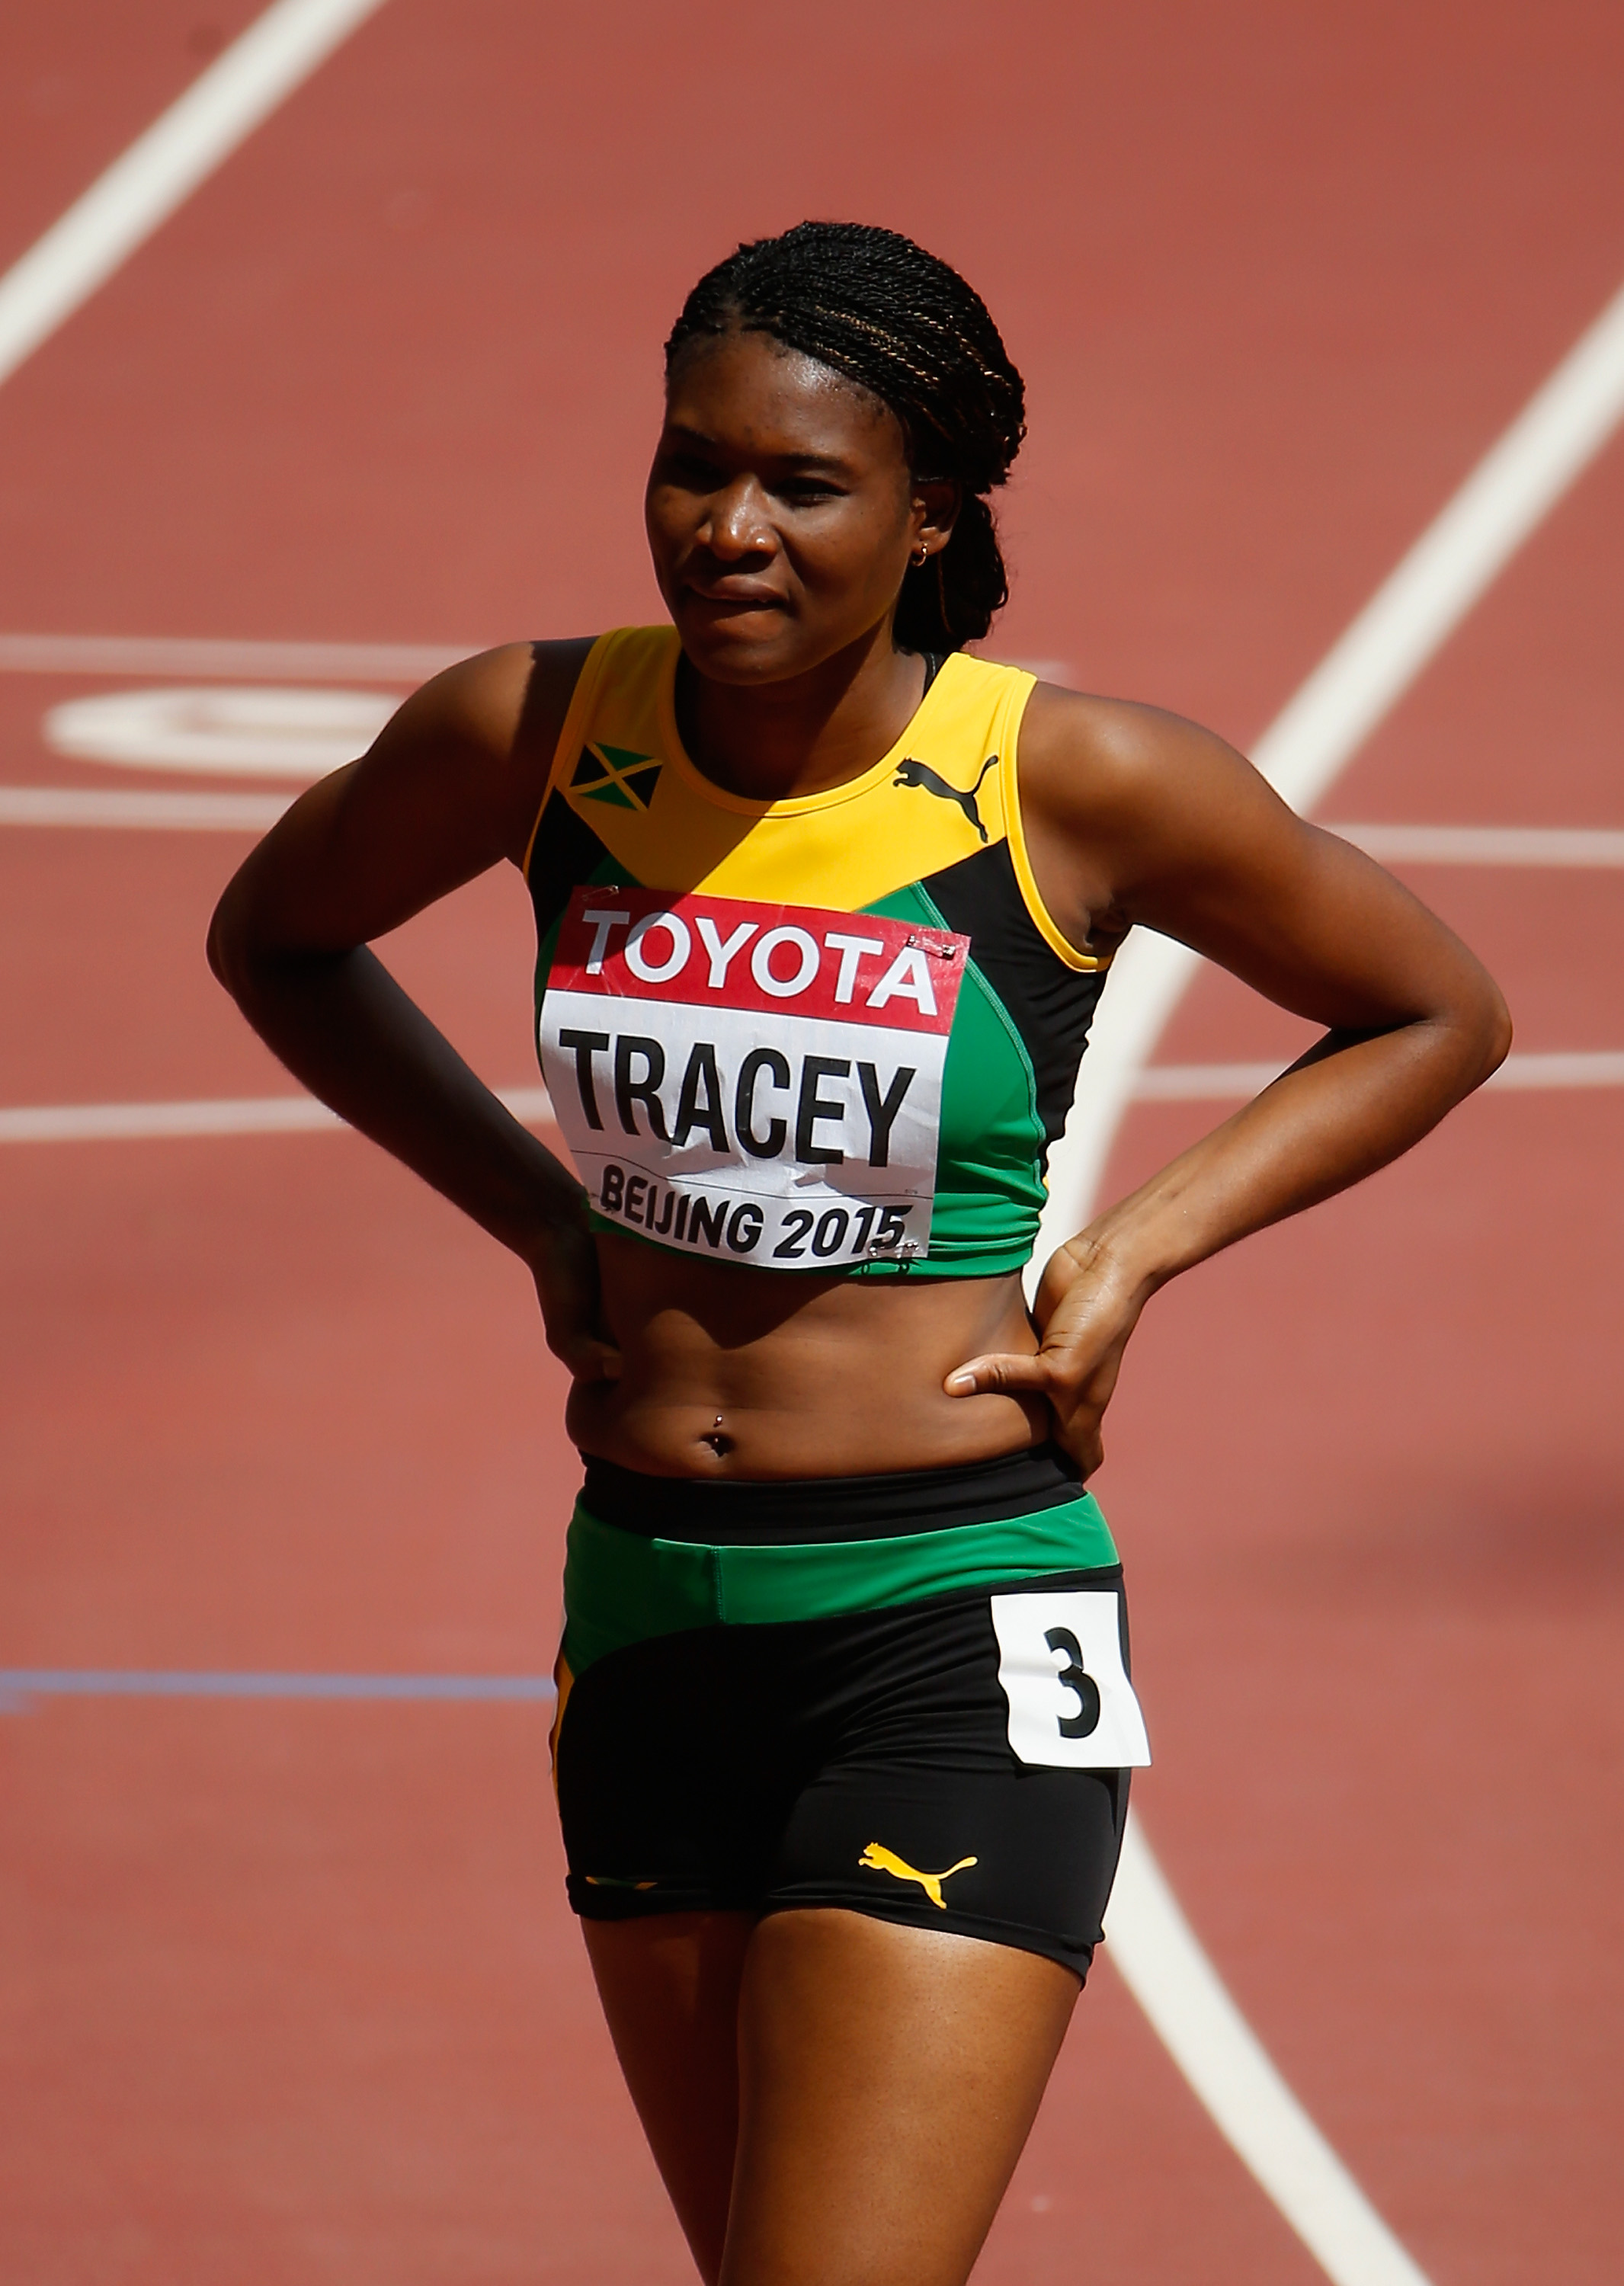 Two PBs, but no 400m hurdles medal for Jamaica